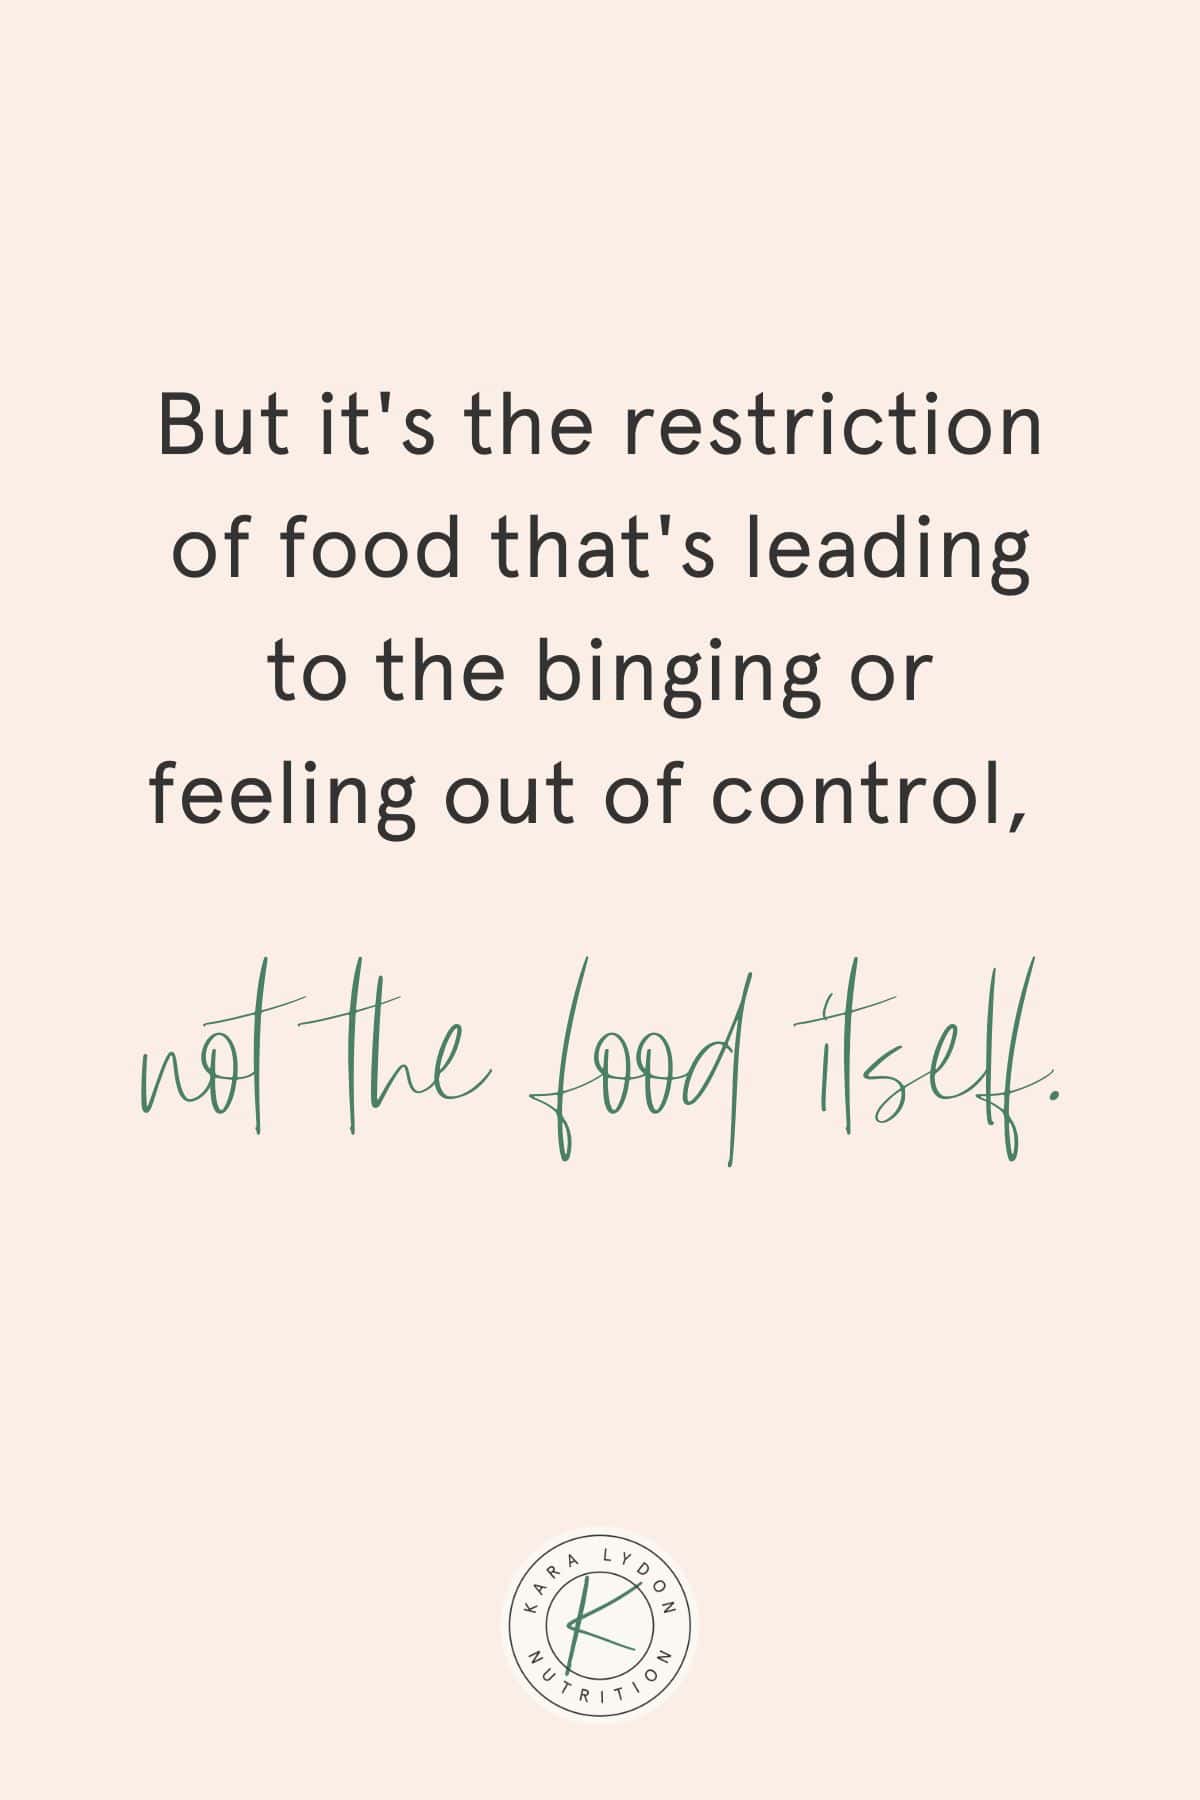 Graphic with quote: "But it's the restriction of food that leads to binge eating or feeling out of control, not the food itself."